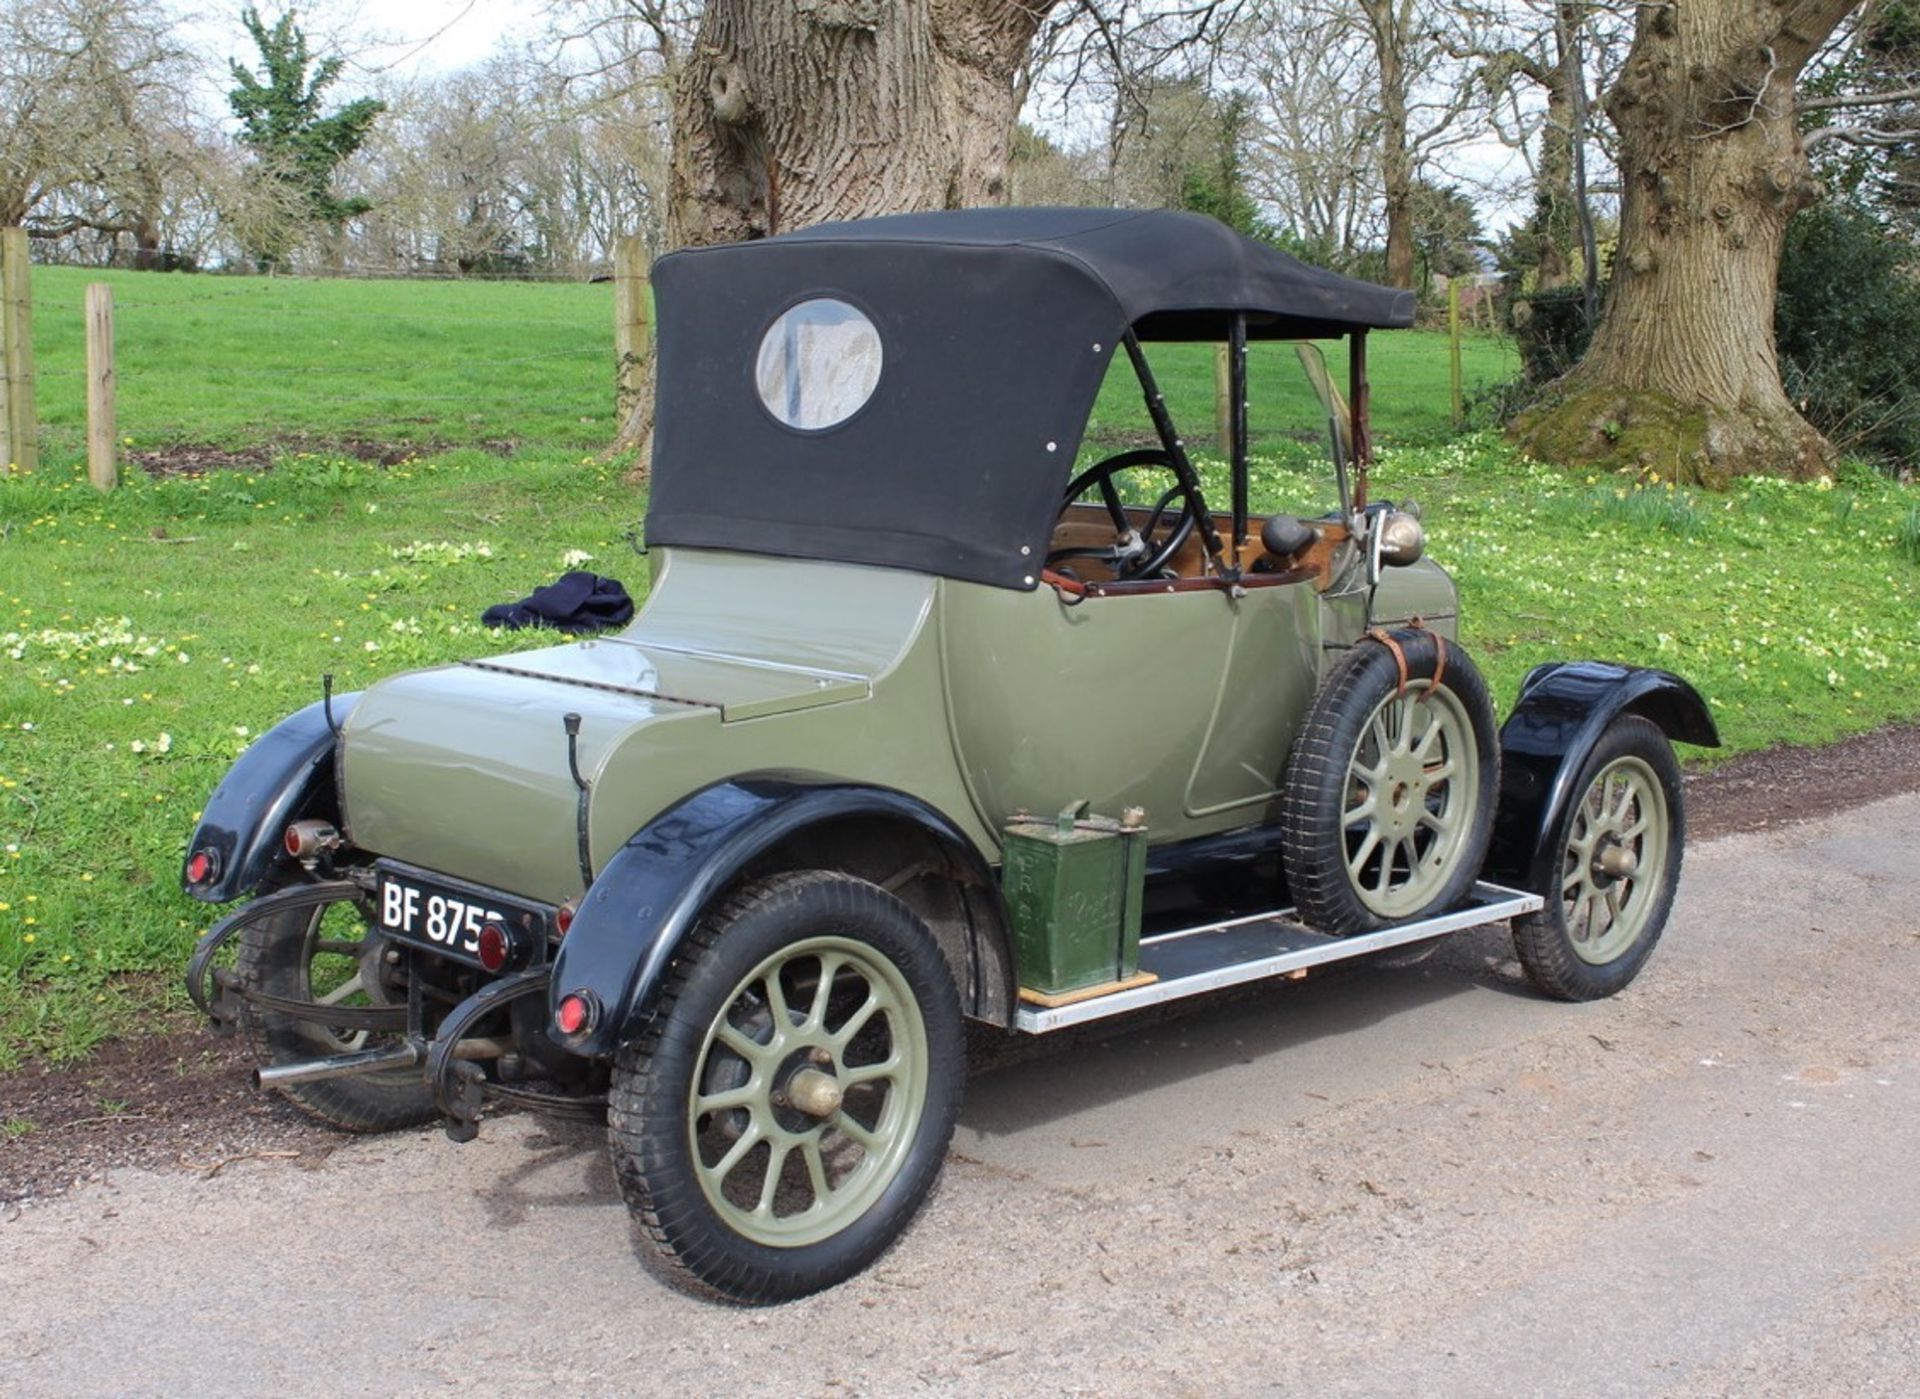 1921 MORRIS OXFORD ‘BULLNOSE’ DOCTOR'S COUPE Registration Number: BF 8753 Chassis Number: TBA - Image 6 of 19